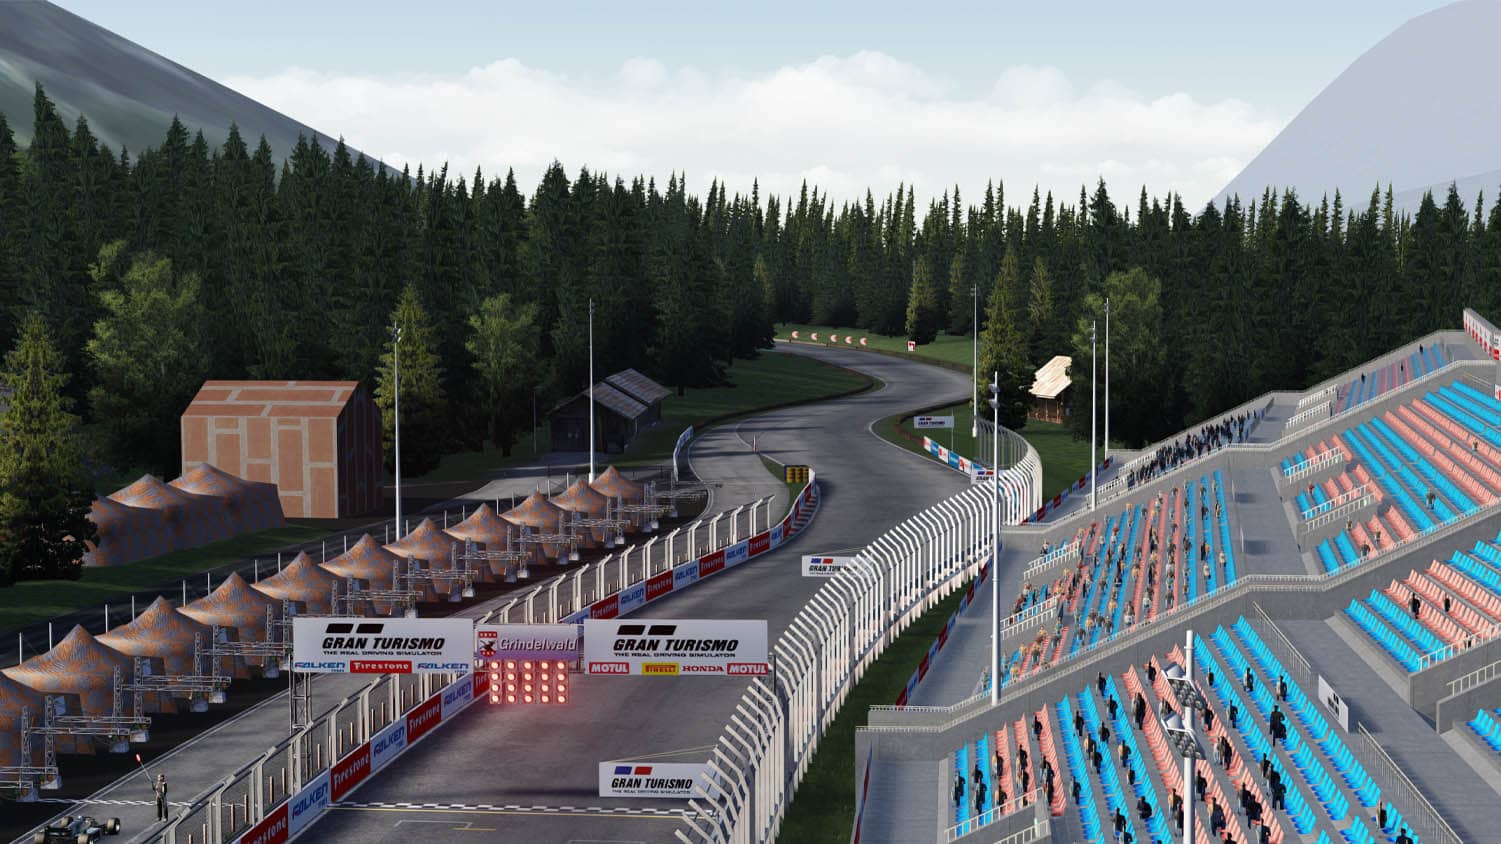 Gran_Turismo_Grindelwald_Day_Assetto_Corsa